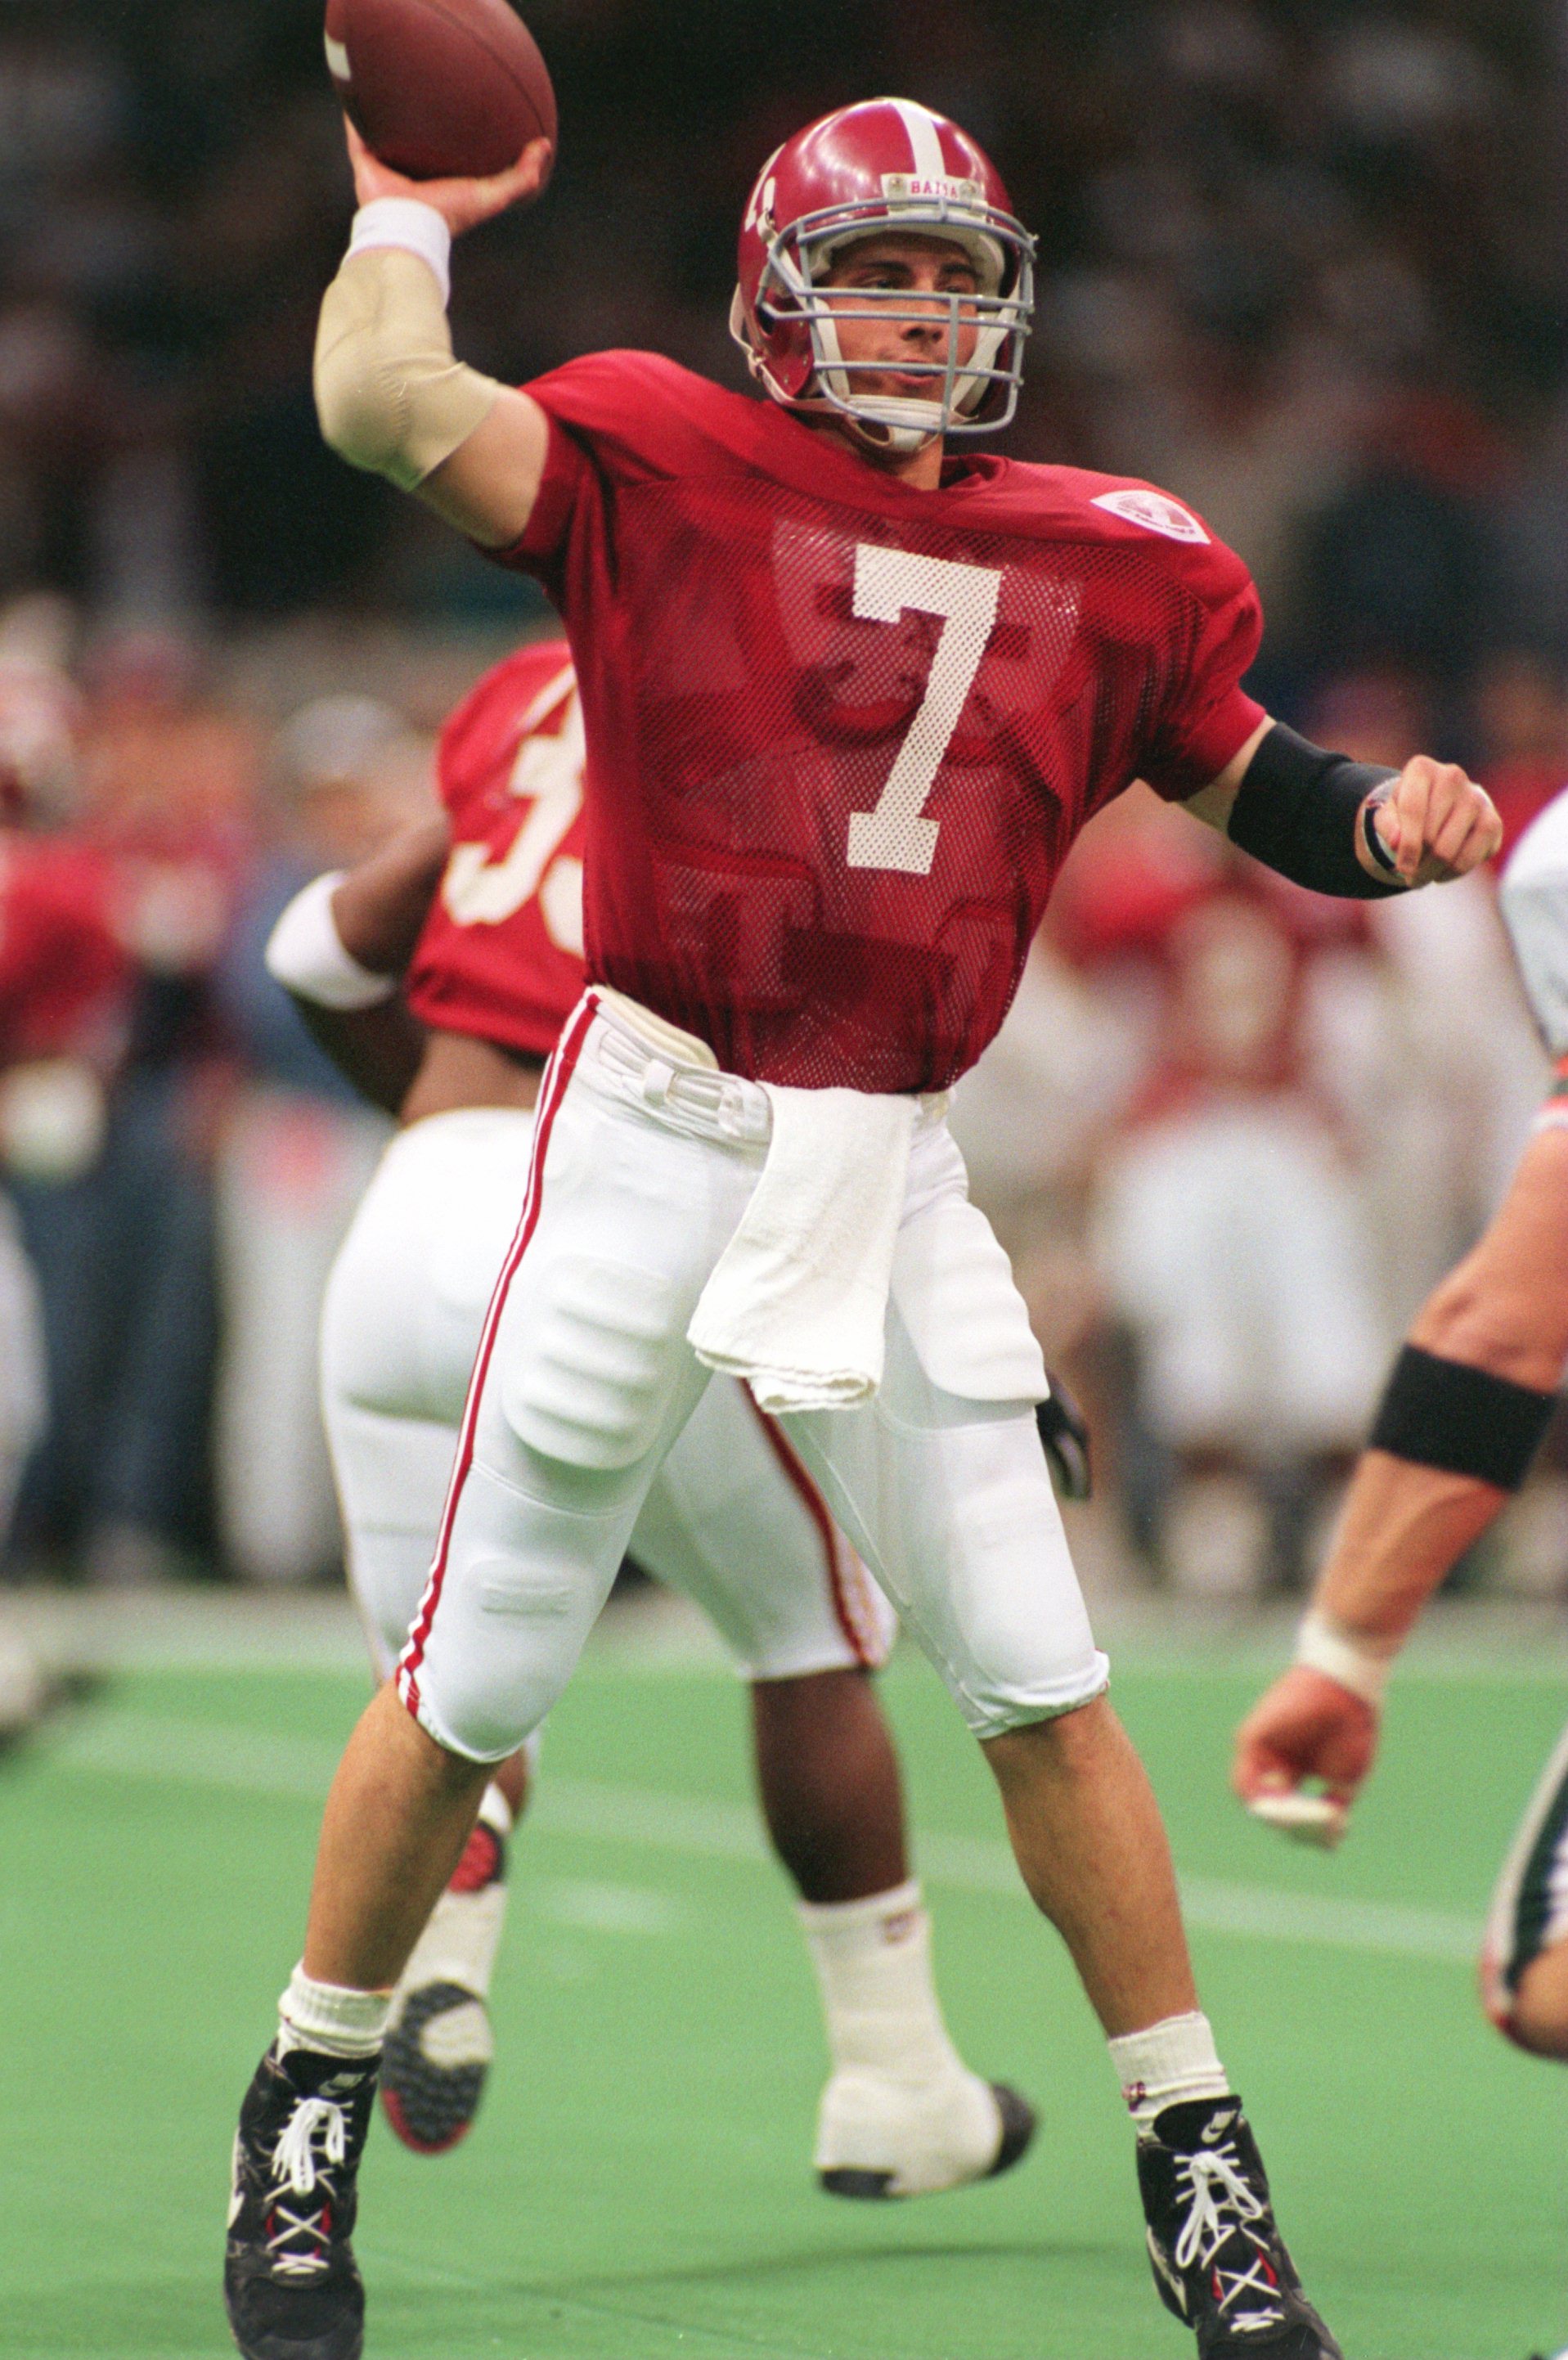 ALABAMA QUARTERBACK JAY BARKER DELIVERS A PASS FROM THE POCKET DURING THE CRIMSON TIDE'S 34-13 VICTORY OVER THE MIAMI HURRICANES IN THE 1993 SUGAR BOWL AT THE SUPERDOME IN NEW ORLEANS, LOUISIANA. WITH THE VICTORY, ALABAMA FINISHED UNDEFEATED AND WAS AWARD